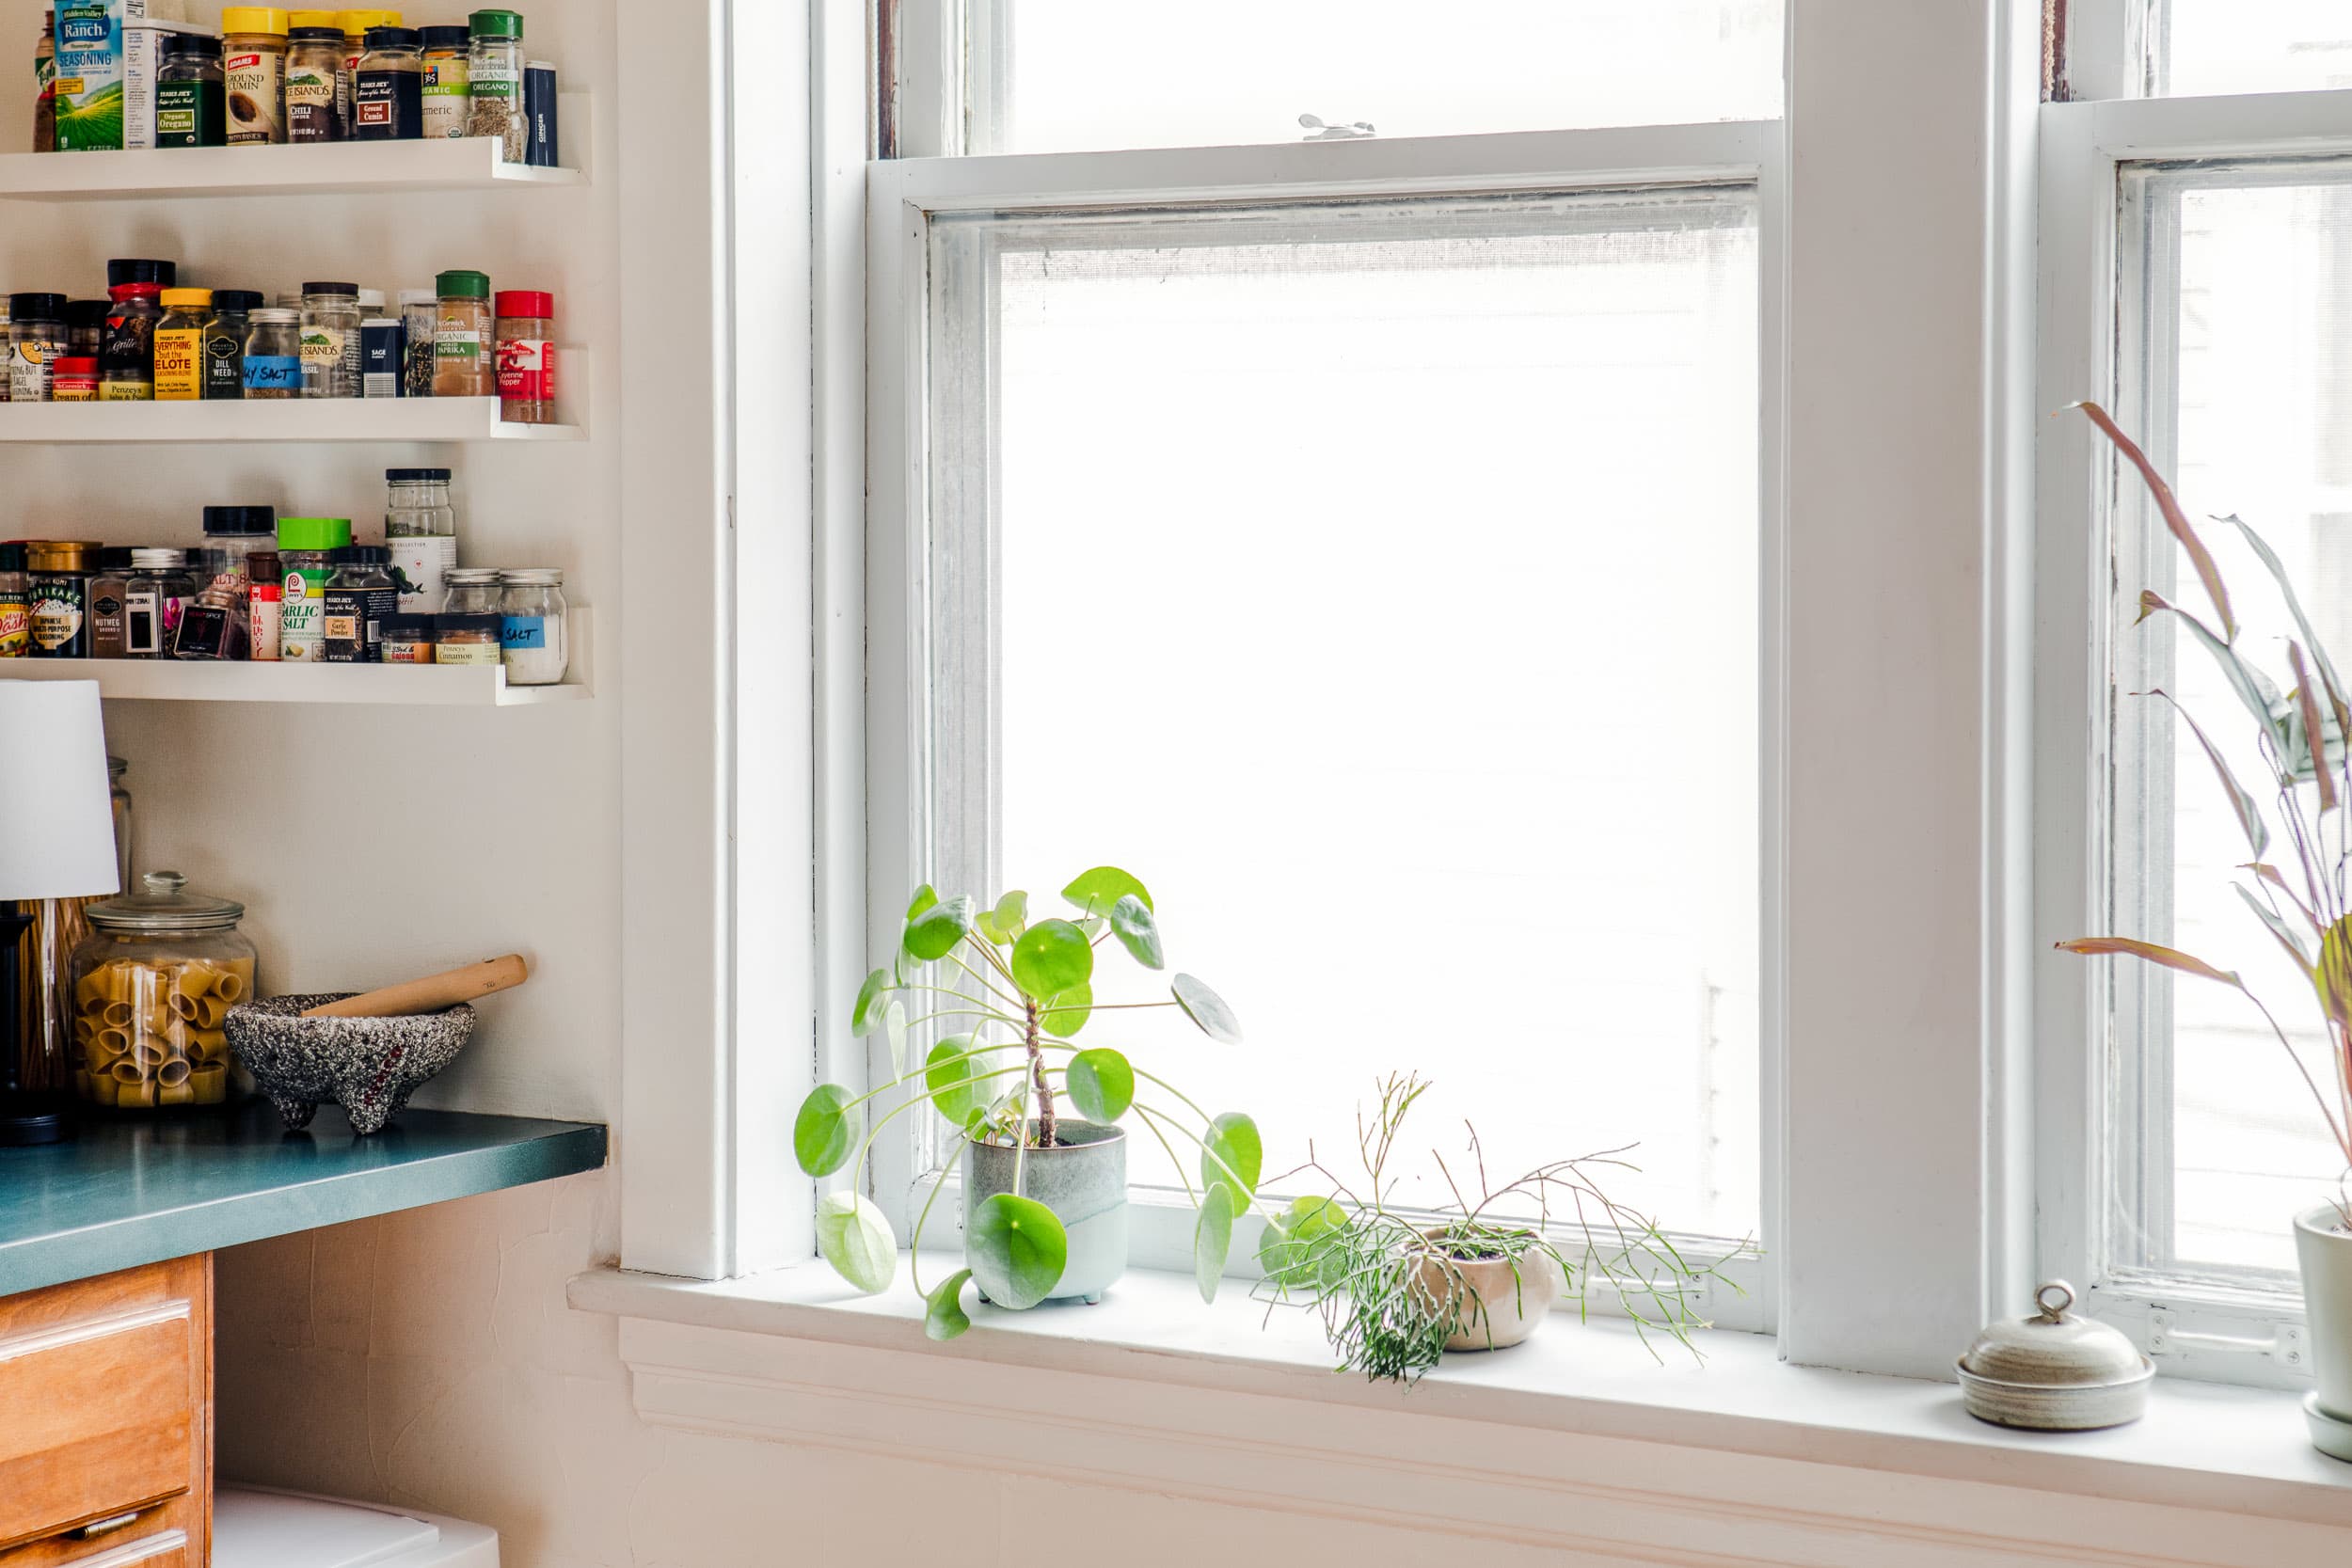 The Grandma-Approved Trick to Make Your Kitchen Windows Crystal